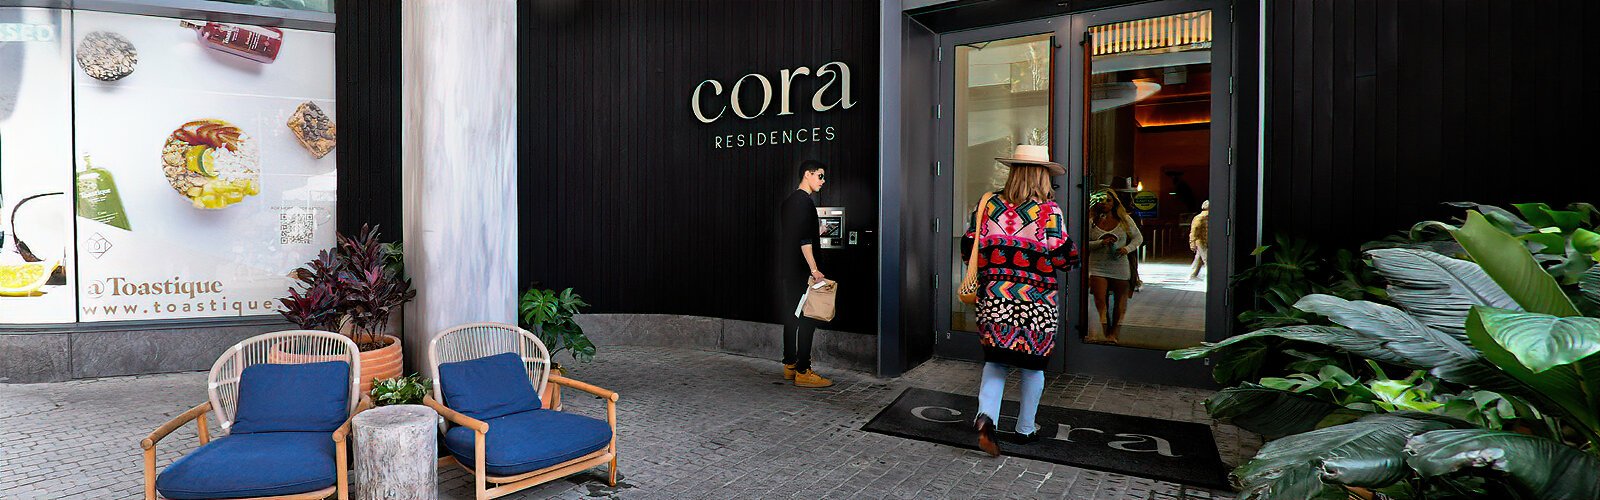 Cora offers luxury residences in a haven of lush greenery and thoughtful amenities and is part of Water Street's new vision for urban life in a revitalized district.